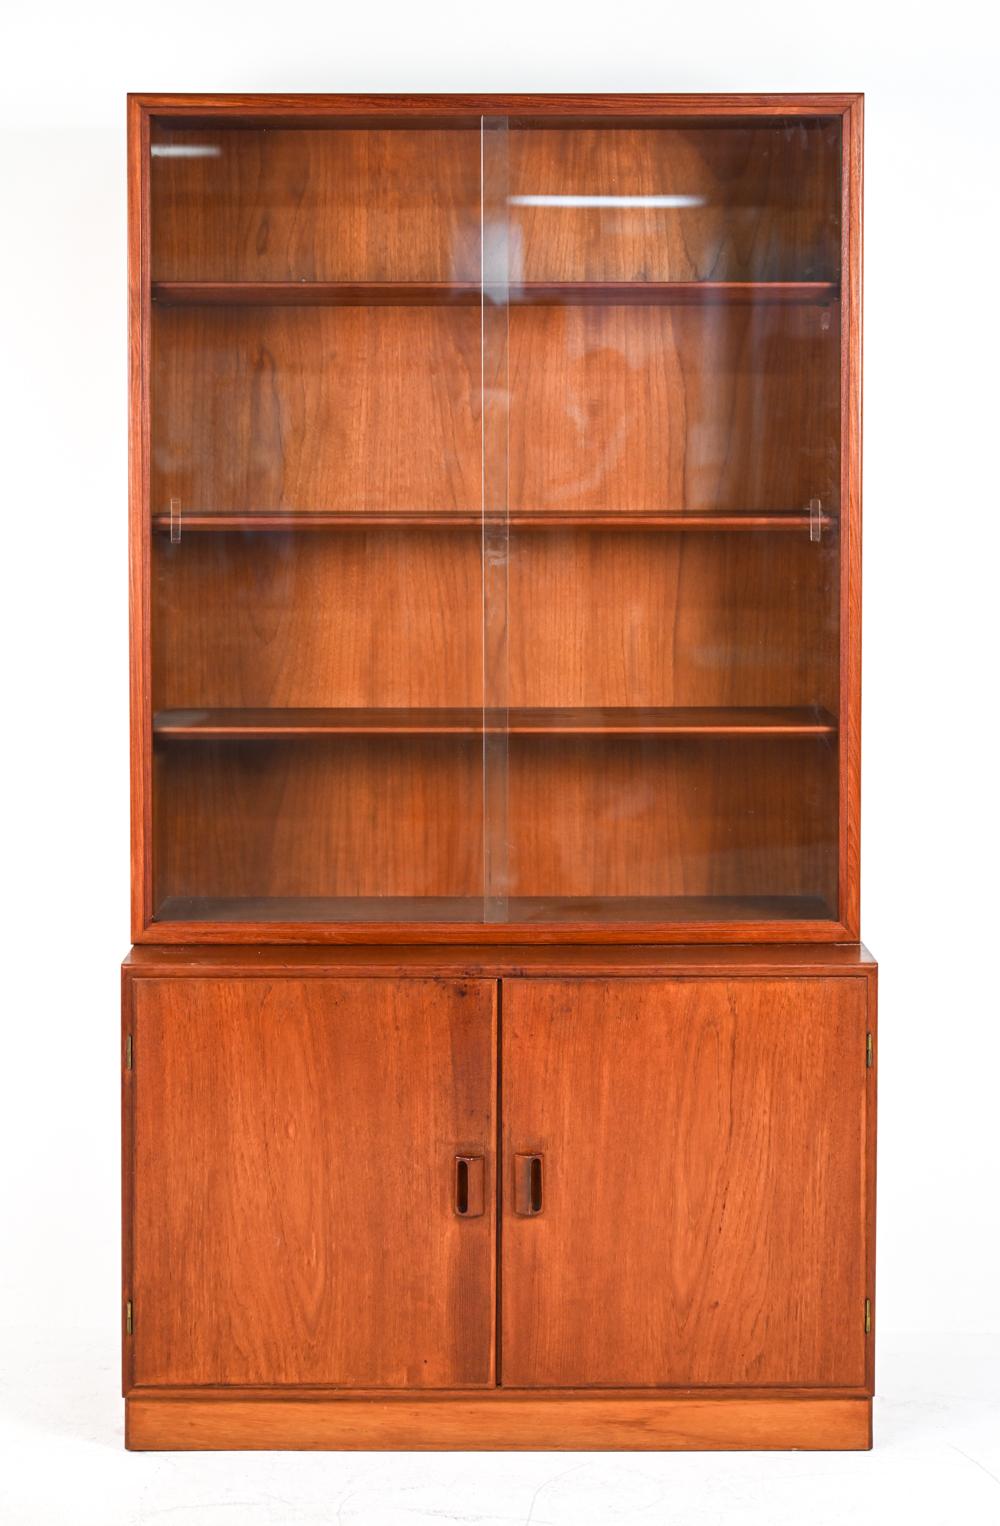 A fabulous high quality two-piece Danish mid-century bookcase or display cabinet in teak wood, designed by Børge Mogensen for the Danish manufacturer Søborg Møbler. This cabinet features adjustable shelves behind sliding glass doors and a bottom